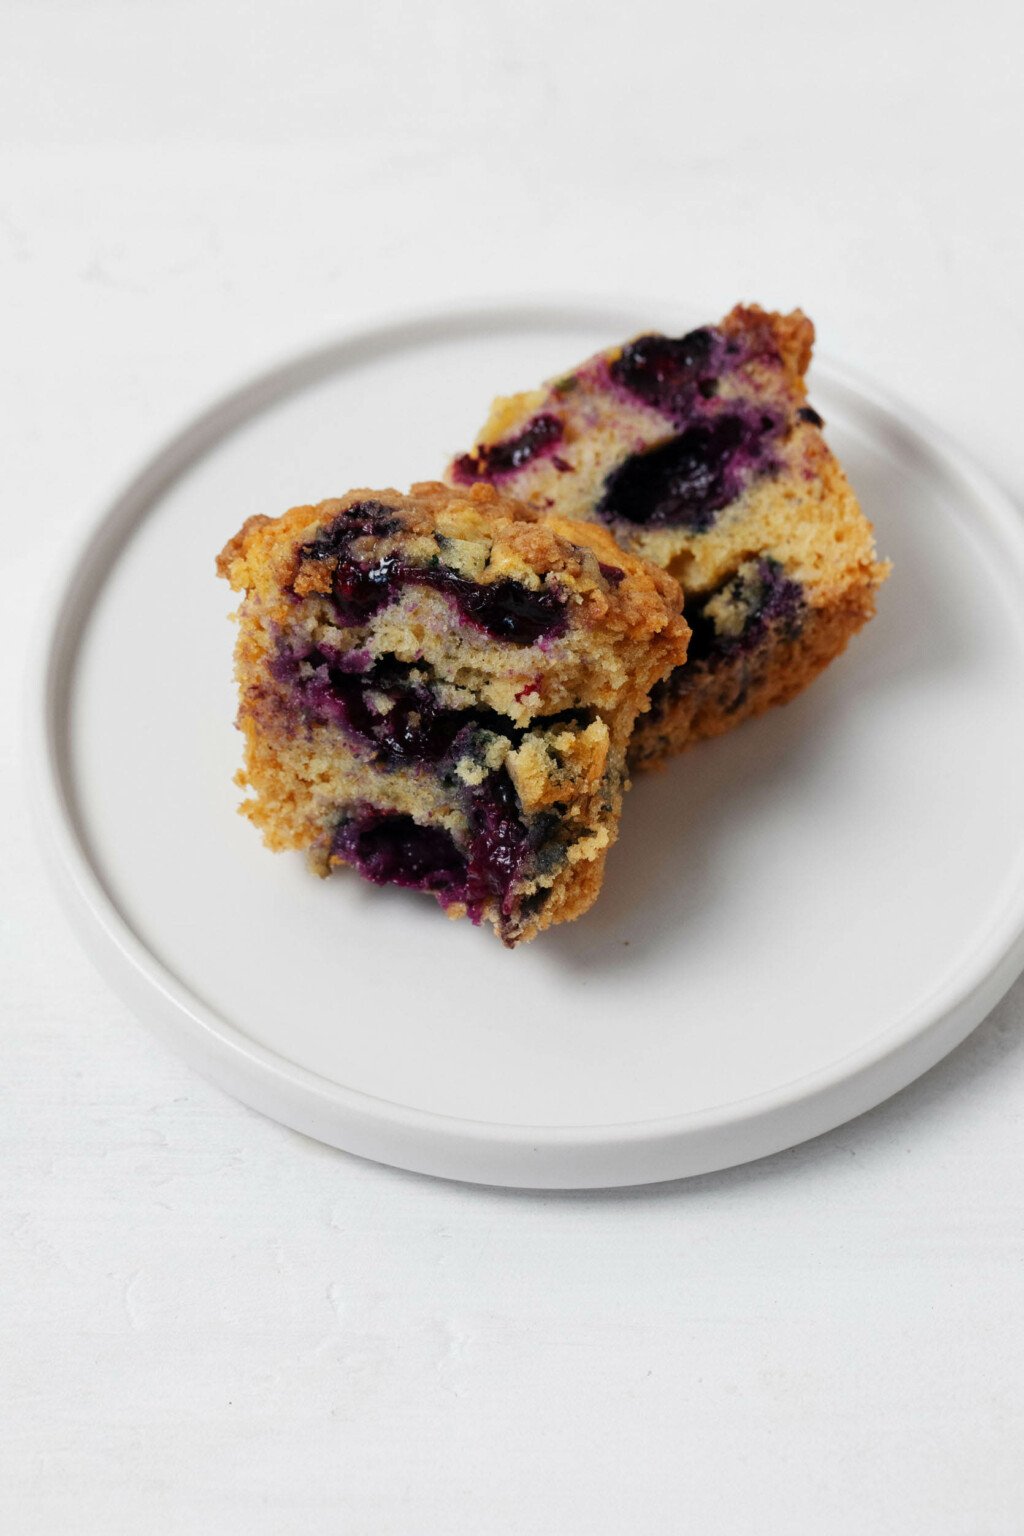 A vegan blueberry crumb muffin is broken apart, resting on a small, round white plate.